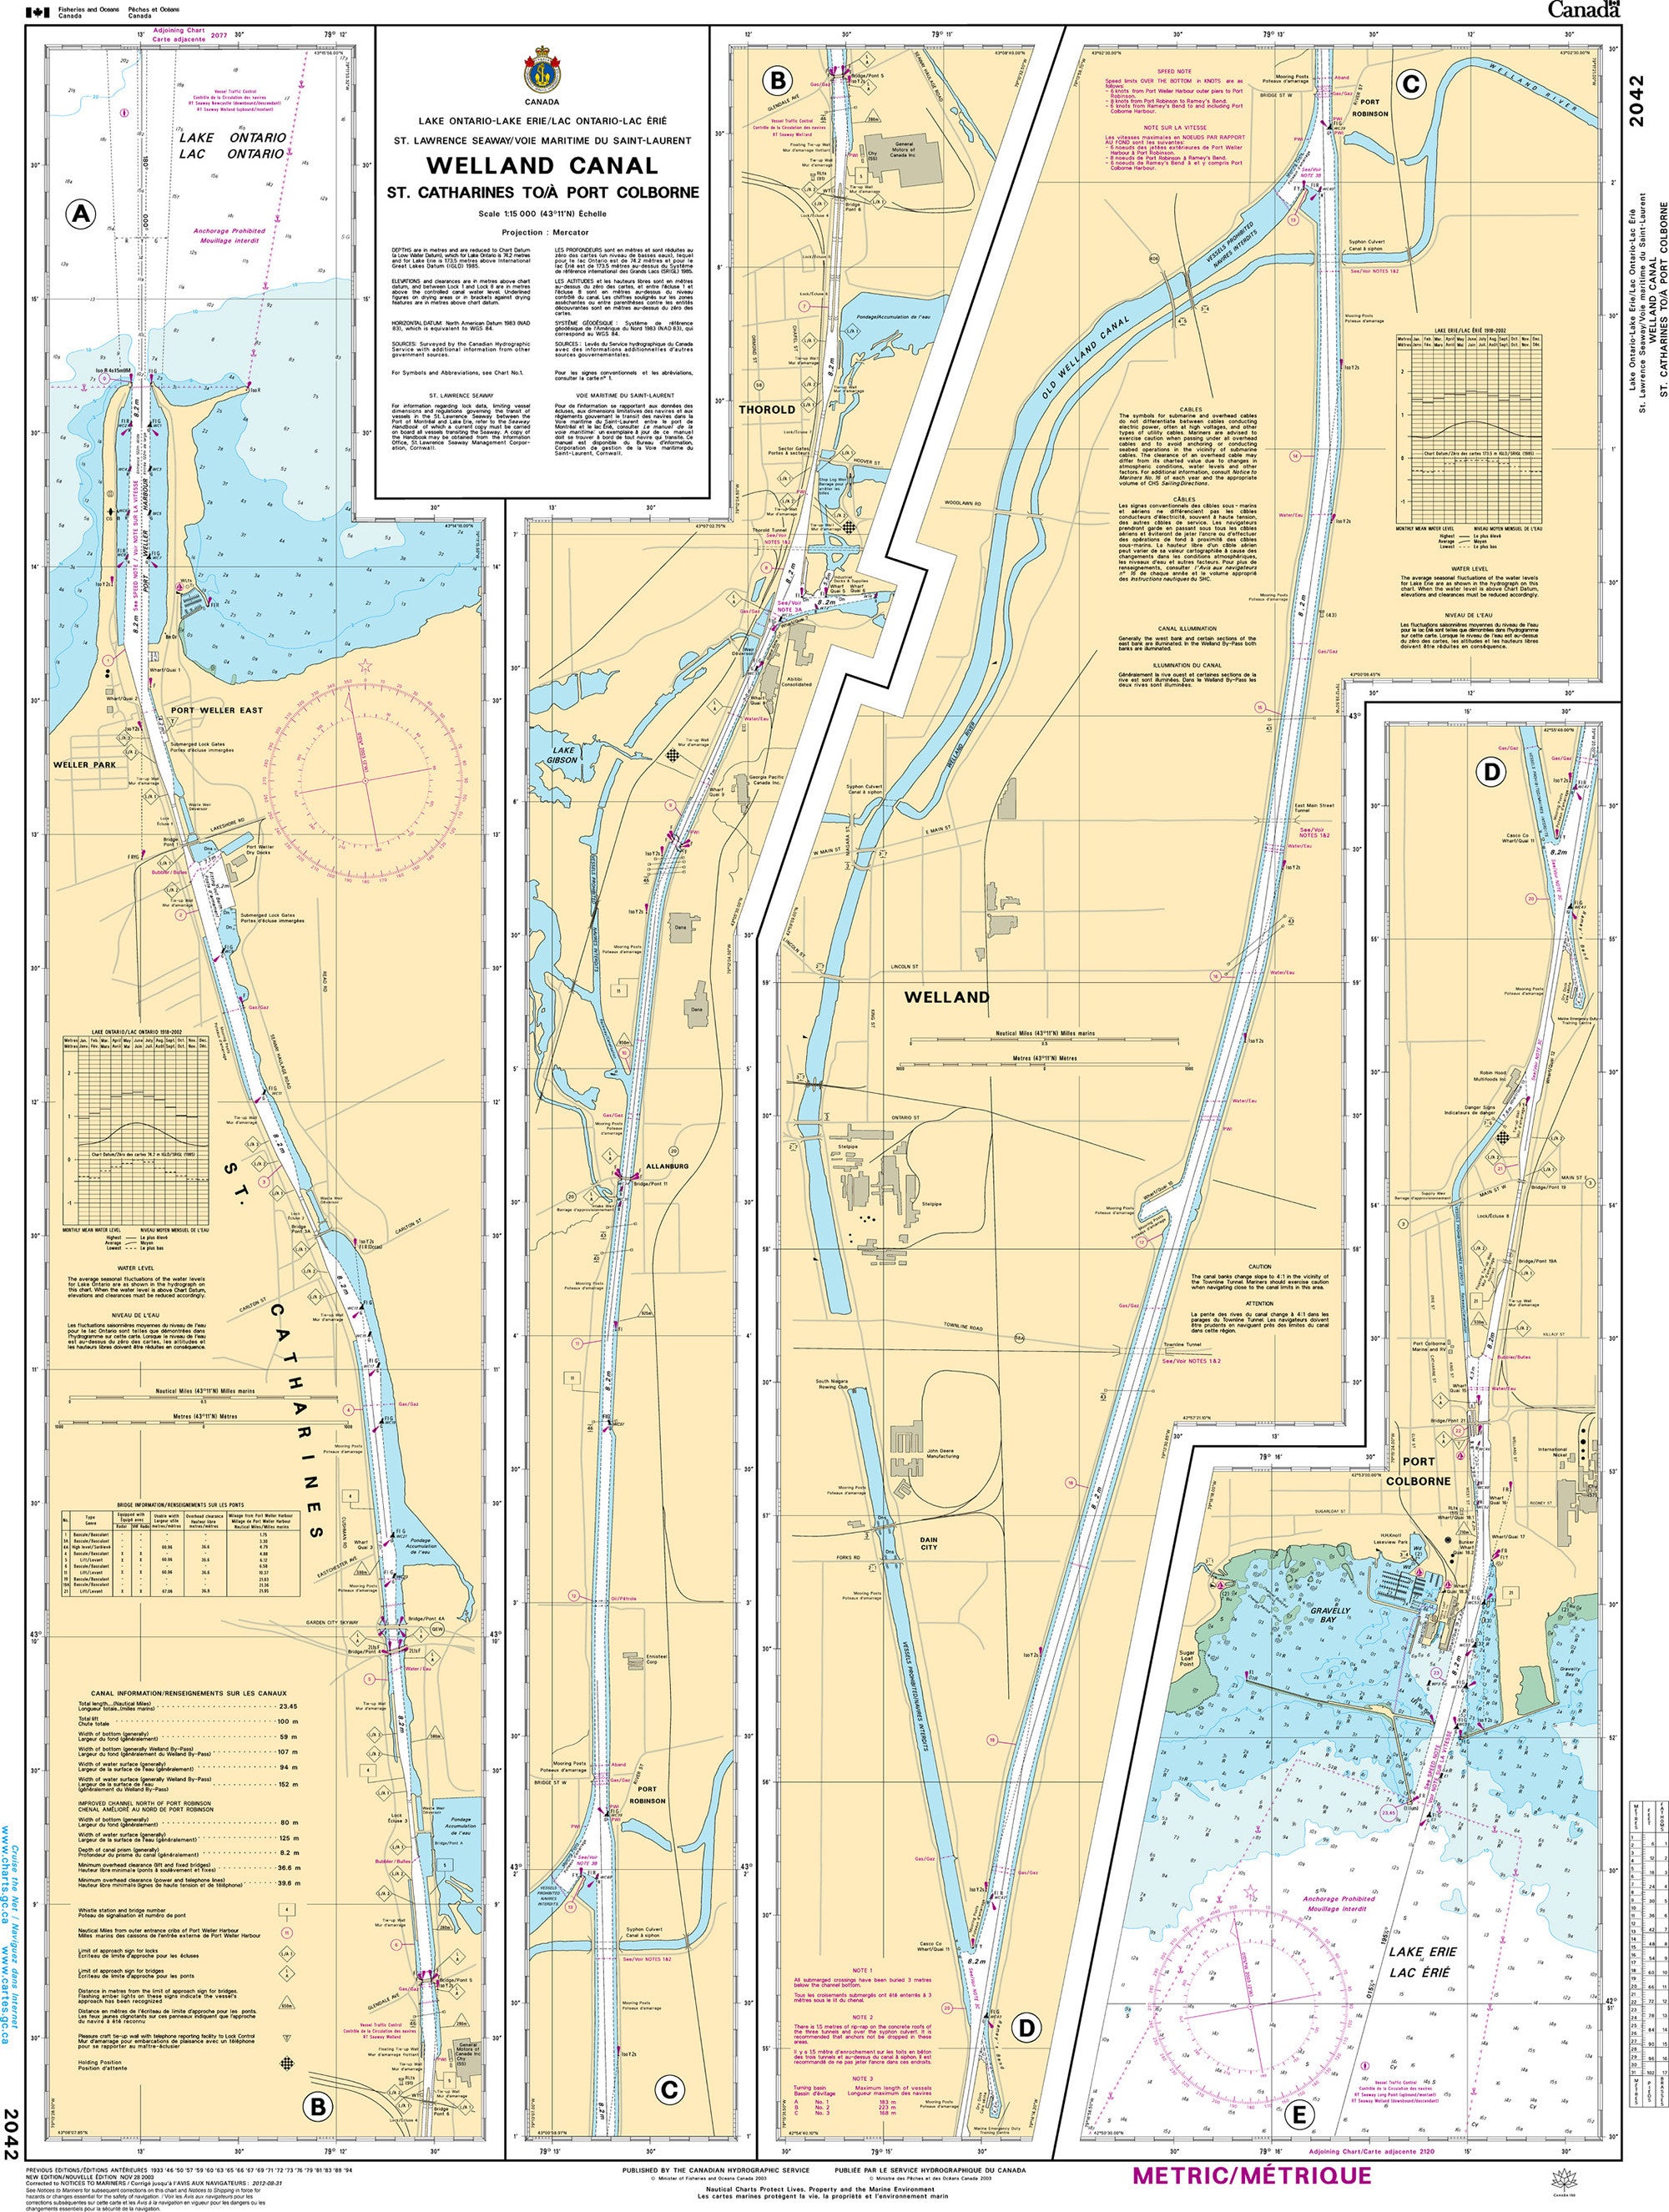 Canadian Hydrographic Service Nautical Chart CHS2042: Welland Canal St.Catharines to/à Port Colborne